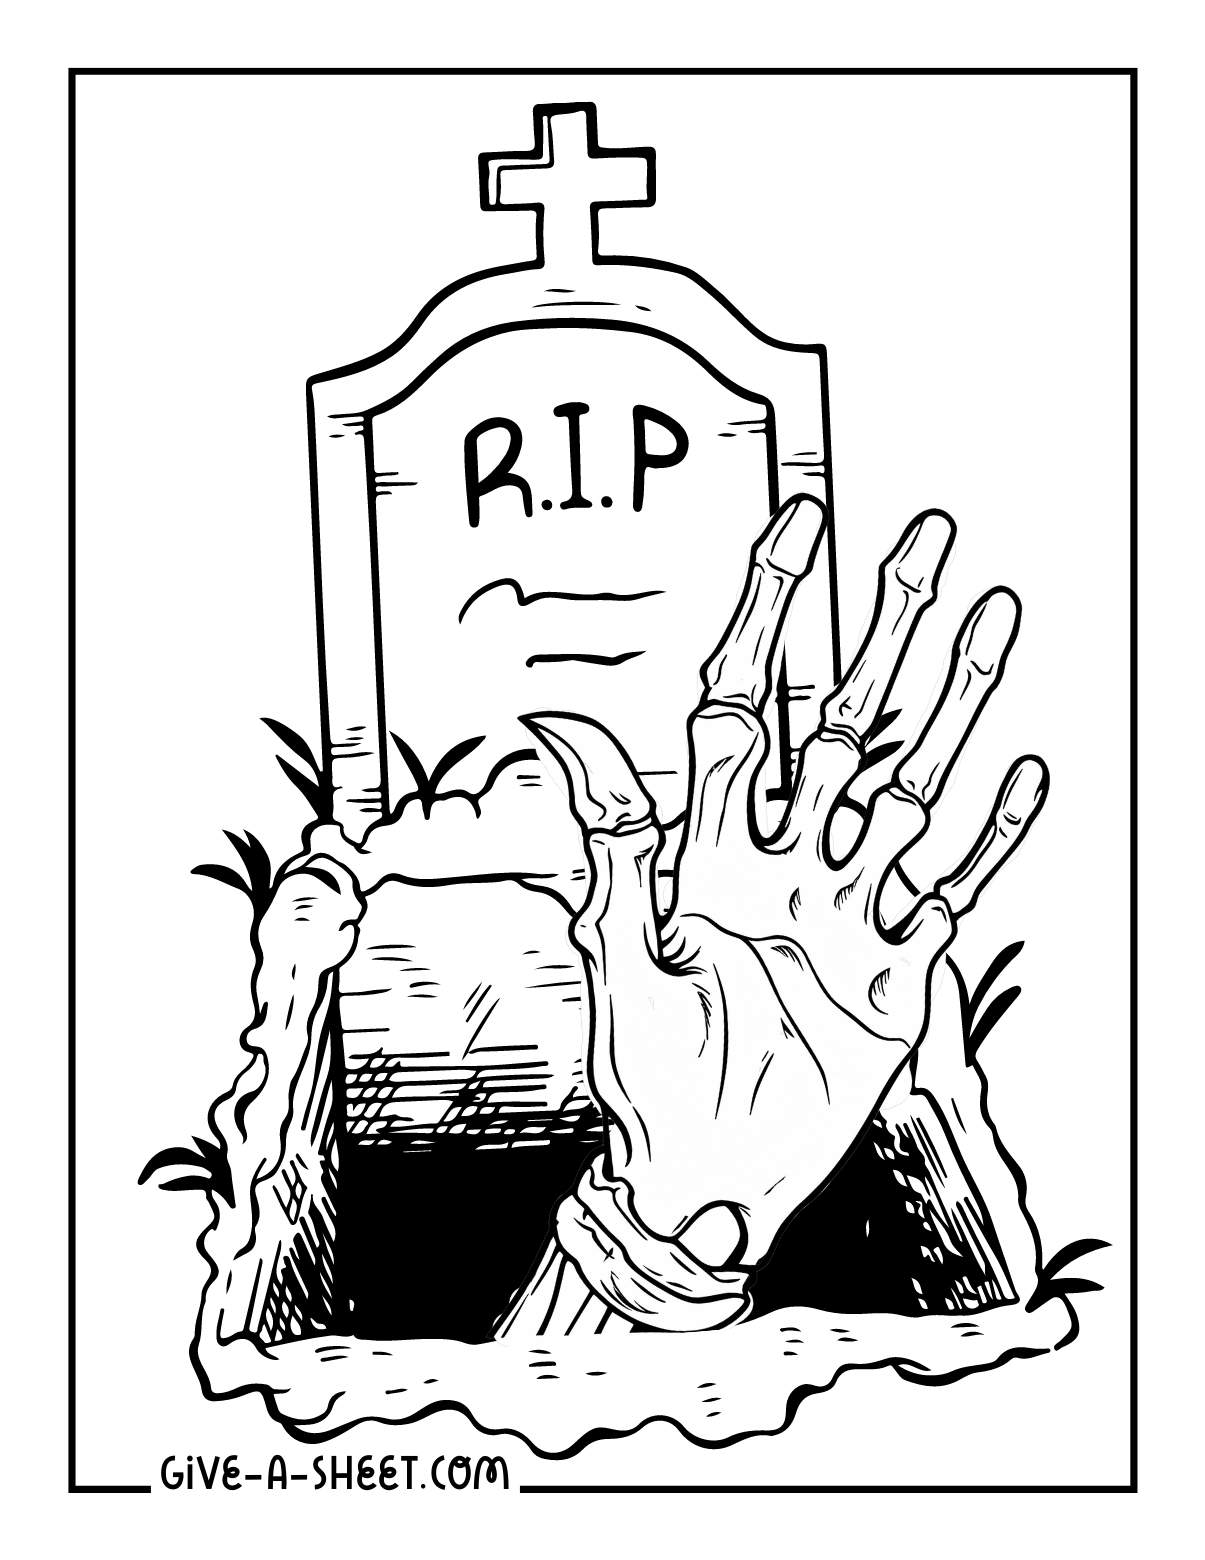 Corpse hand coming out from grave coloring page.